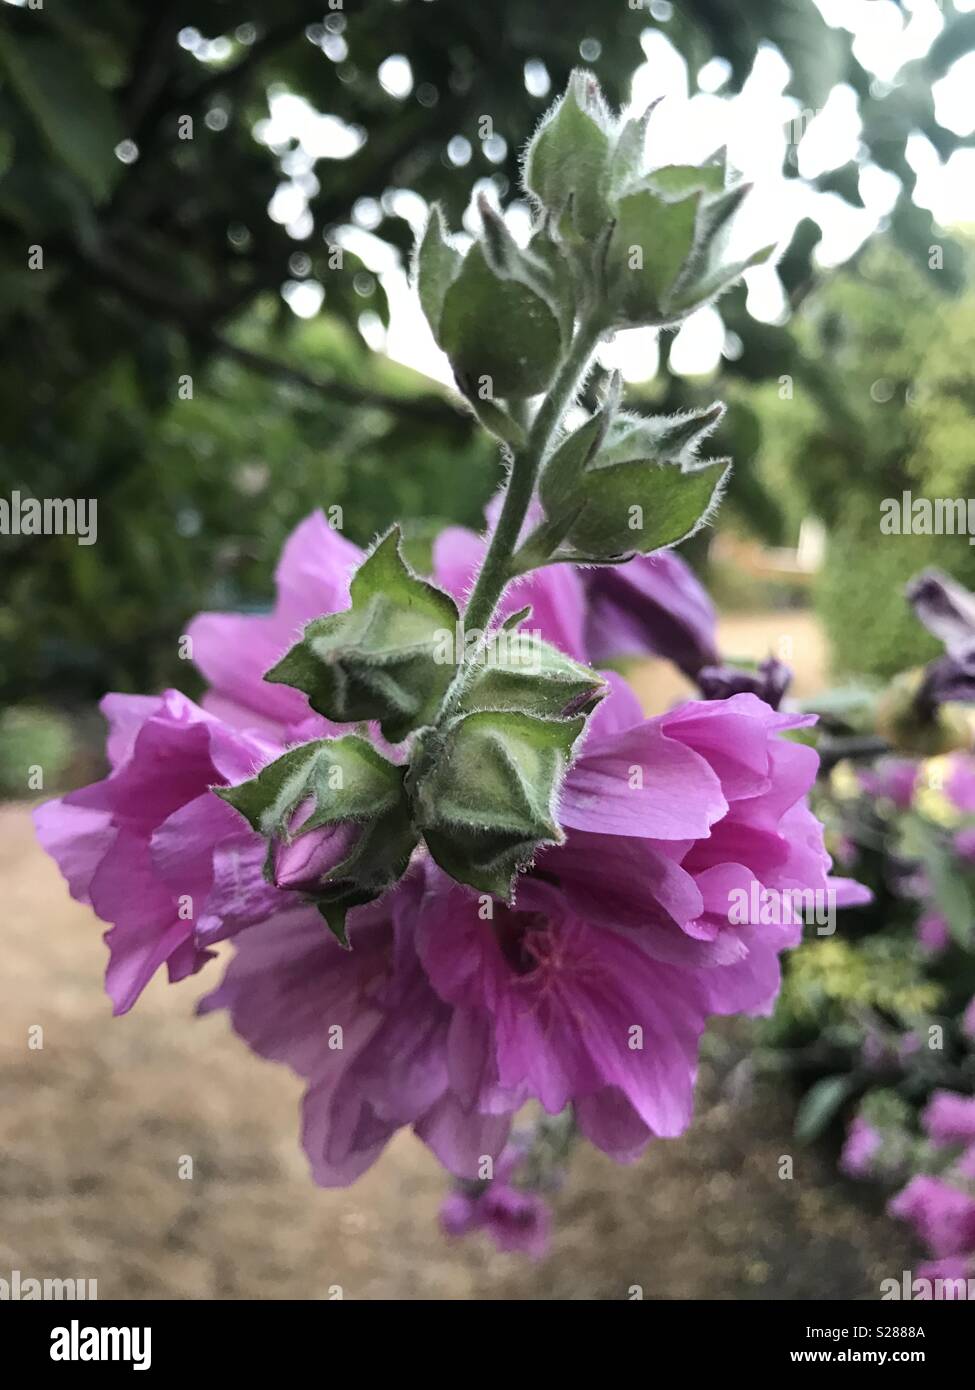 Flowering pink blooms of a lavatera tree Stock Photo